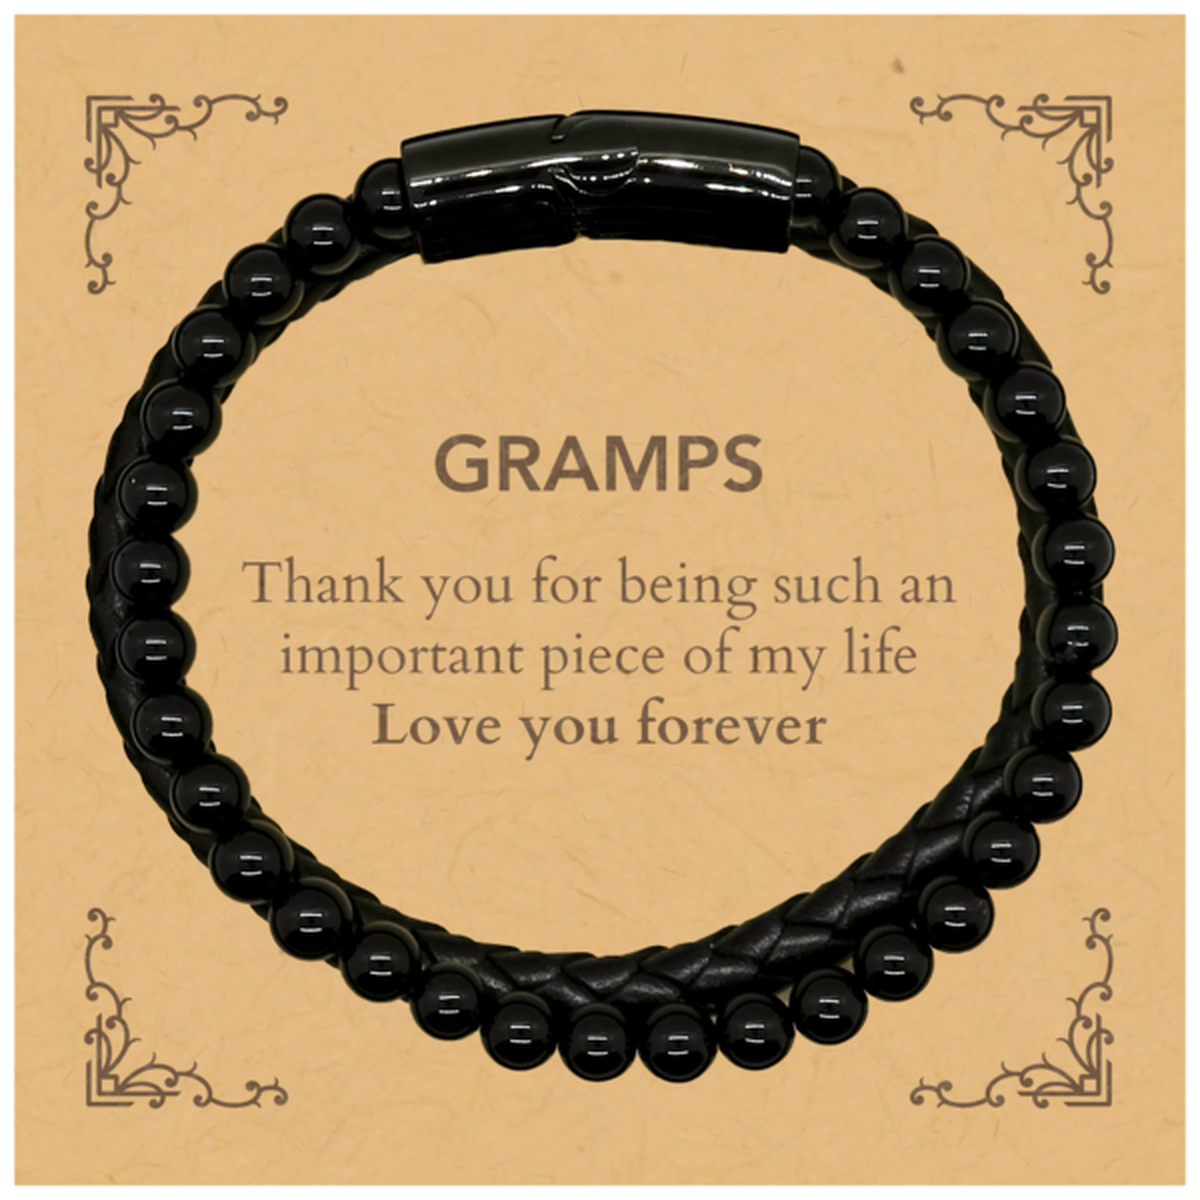 Appropriate Gramps Stone Leather Bracelets Epic Birthday Gifts for Gramps Thank you for being such an important piece of my life Gramps Christmas Mothers Fathers Day